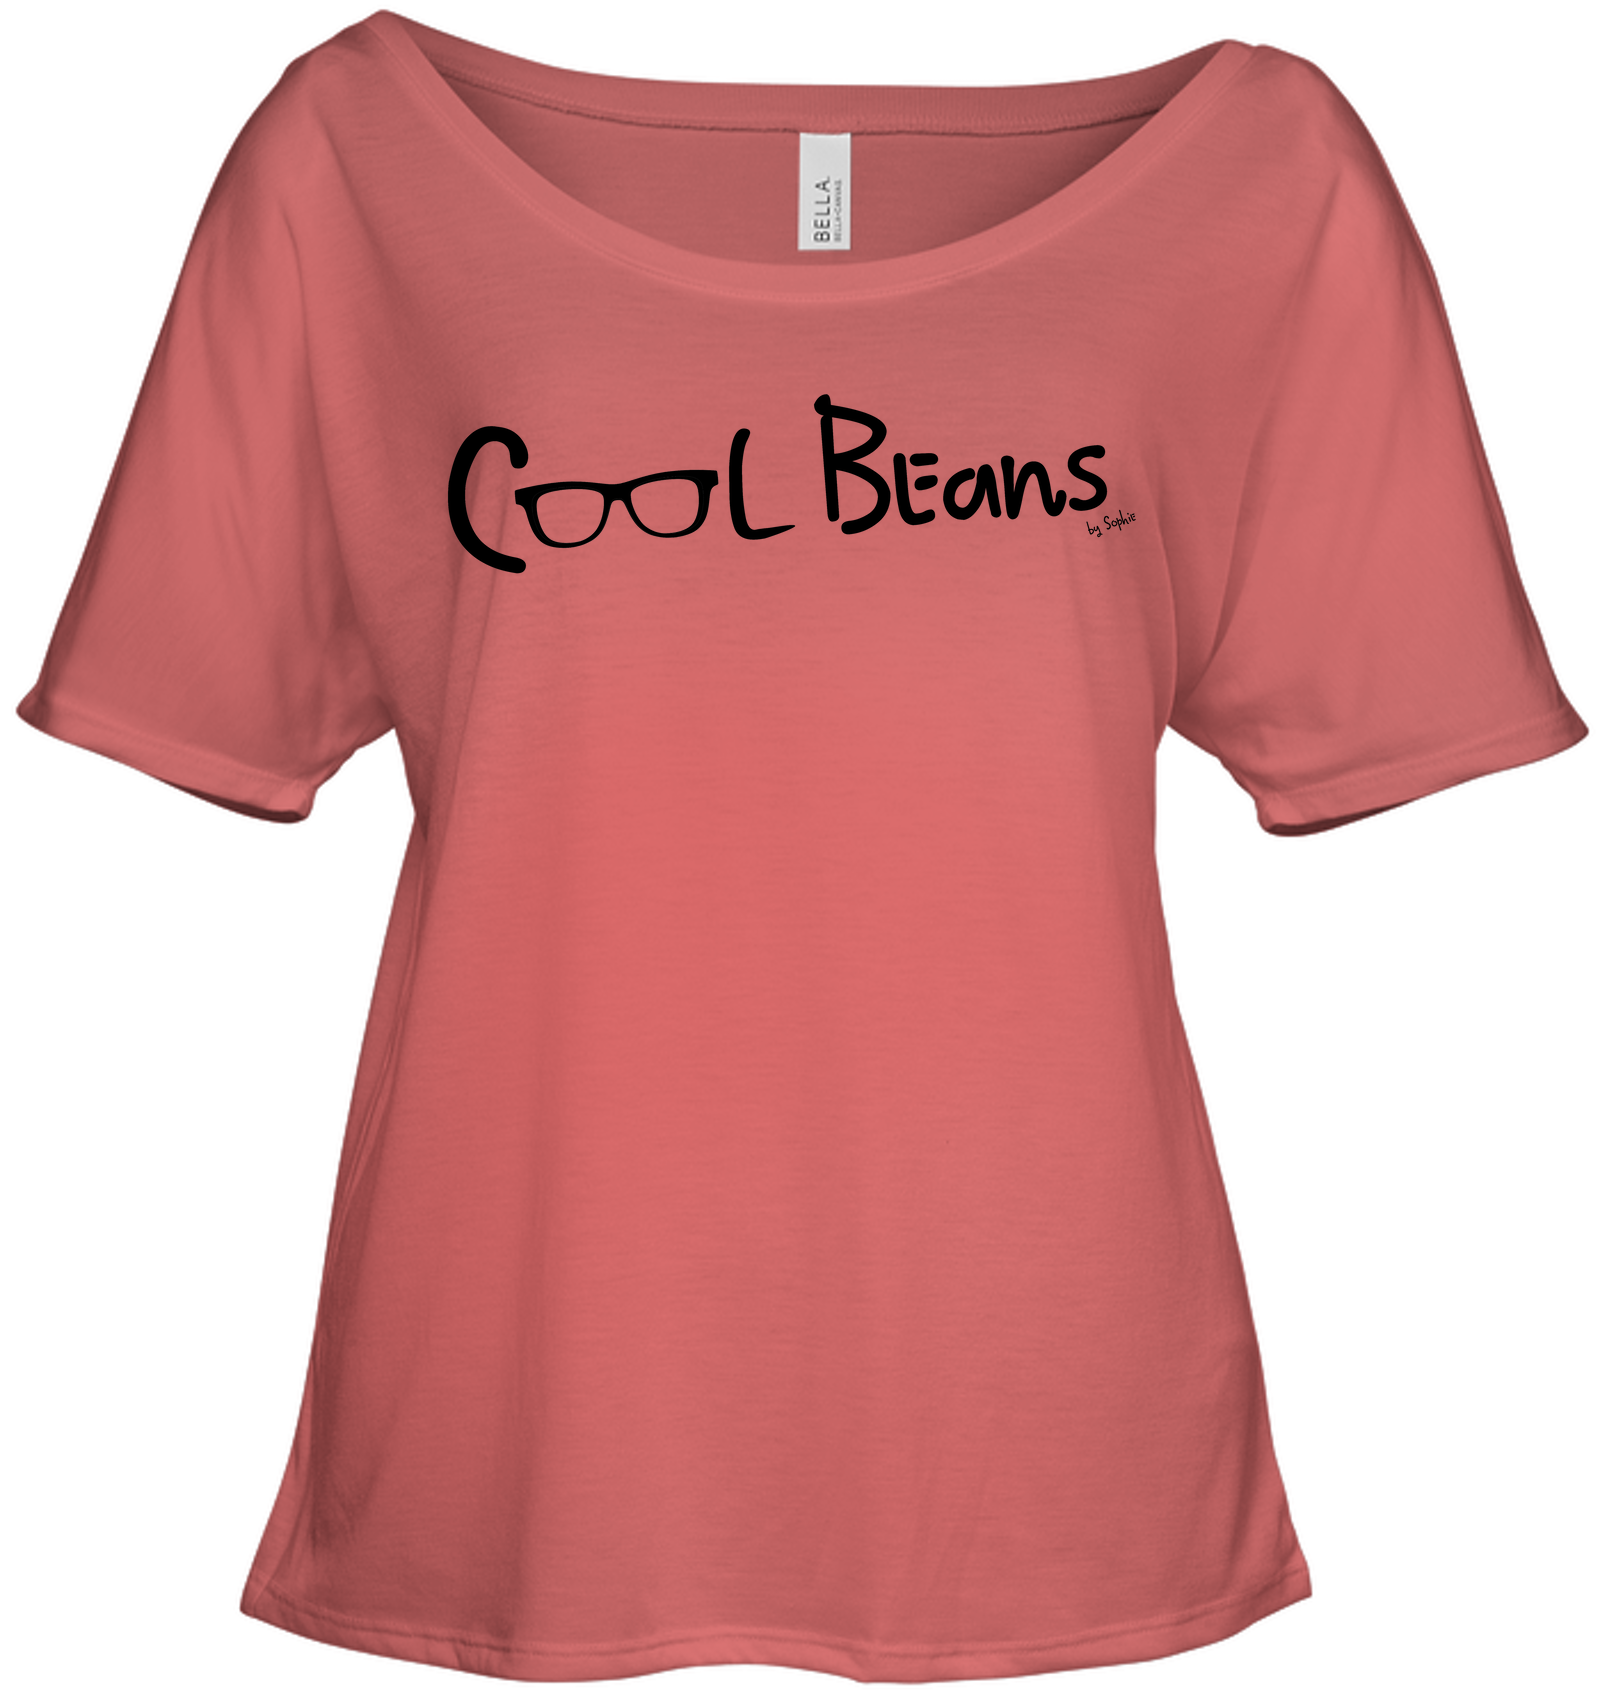 Cool Beans - Black (Style 2) - Bella + Canvas Women's Slouchy Tee